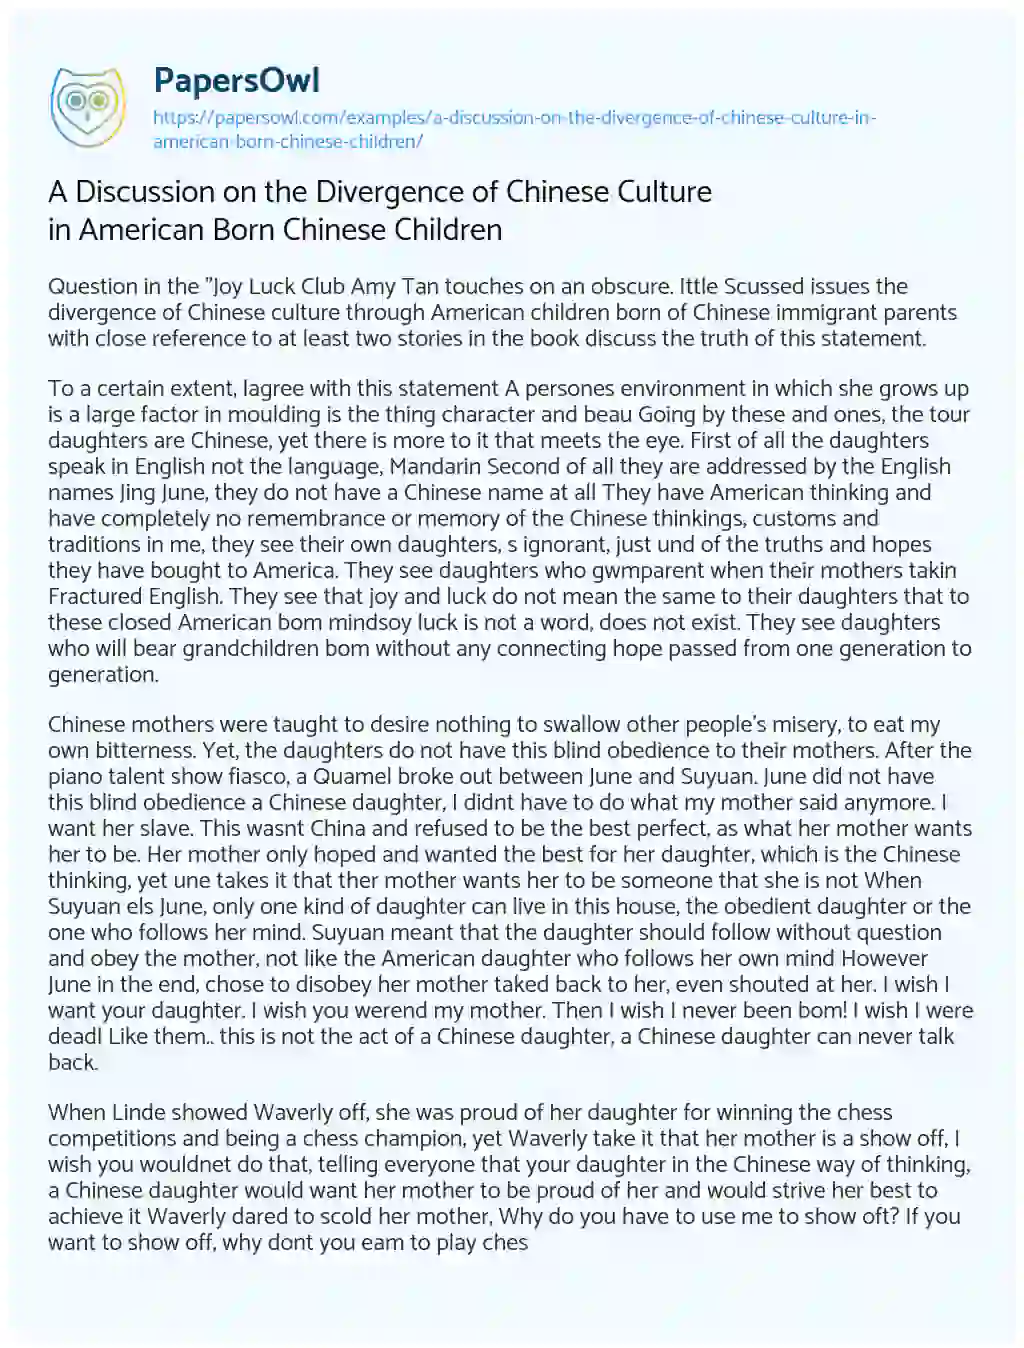 Essay on A Discussion on the Divergence of Chinese Culture in American Born Chinese Children